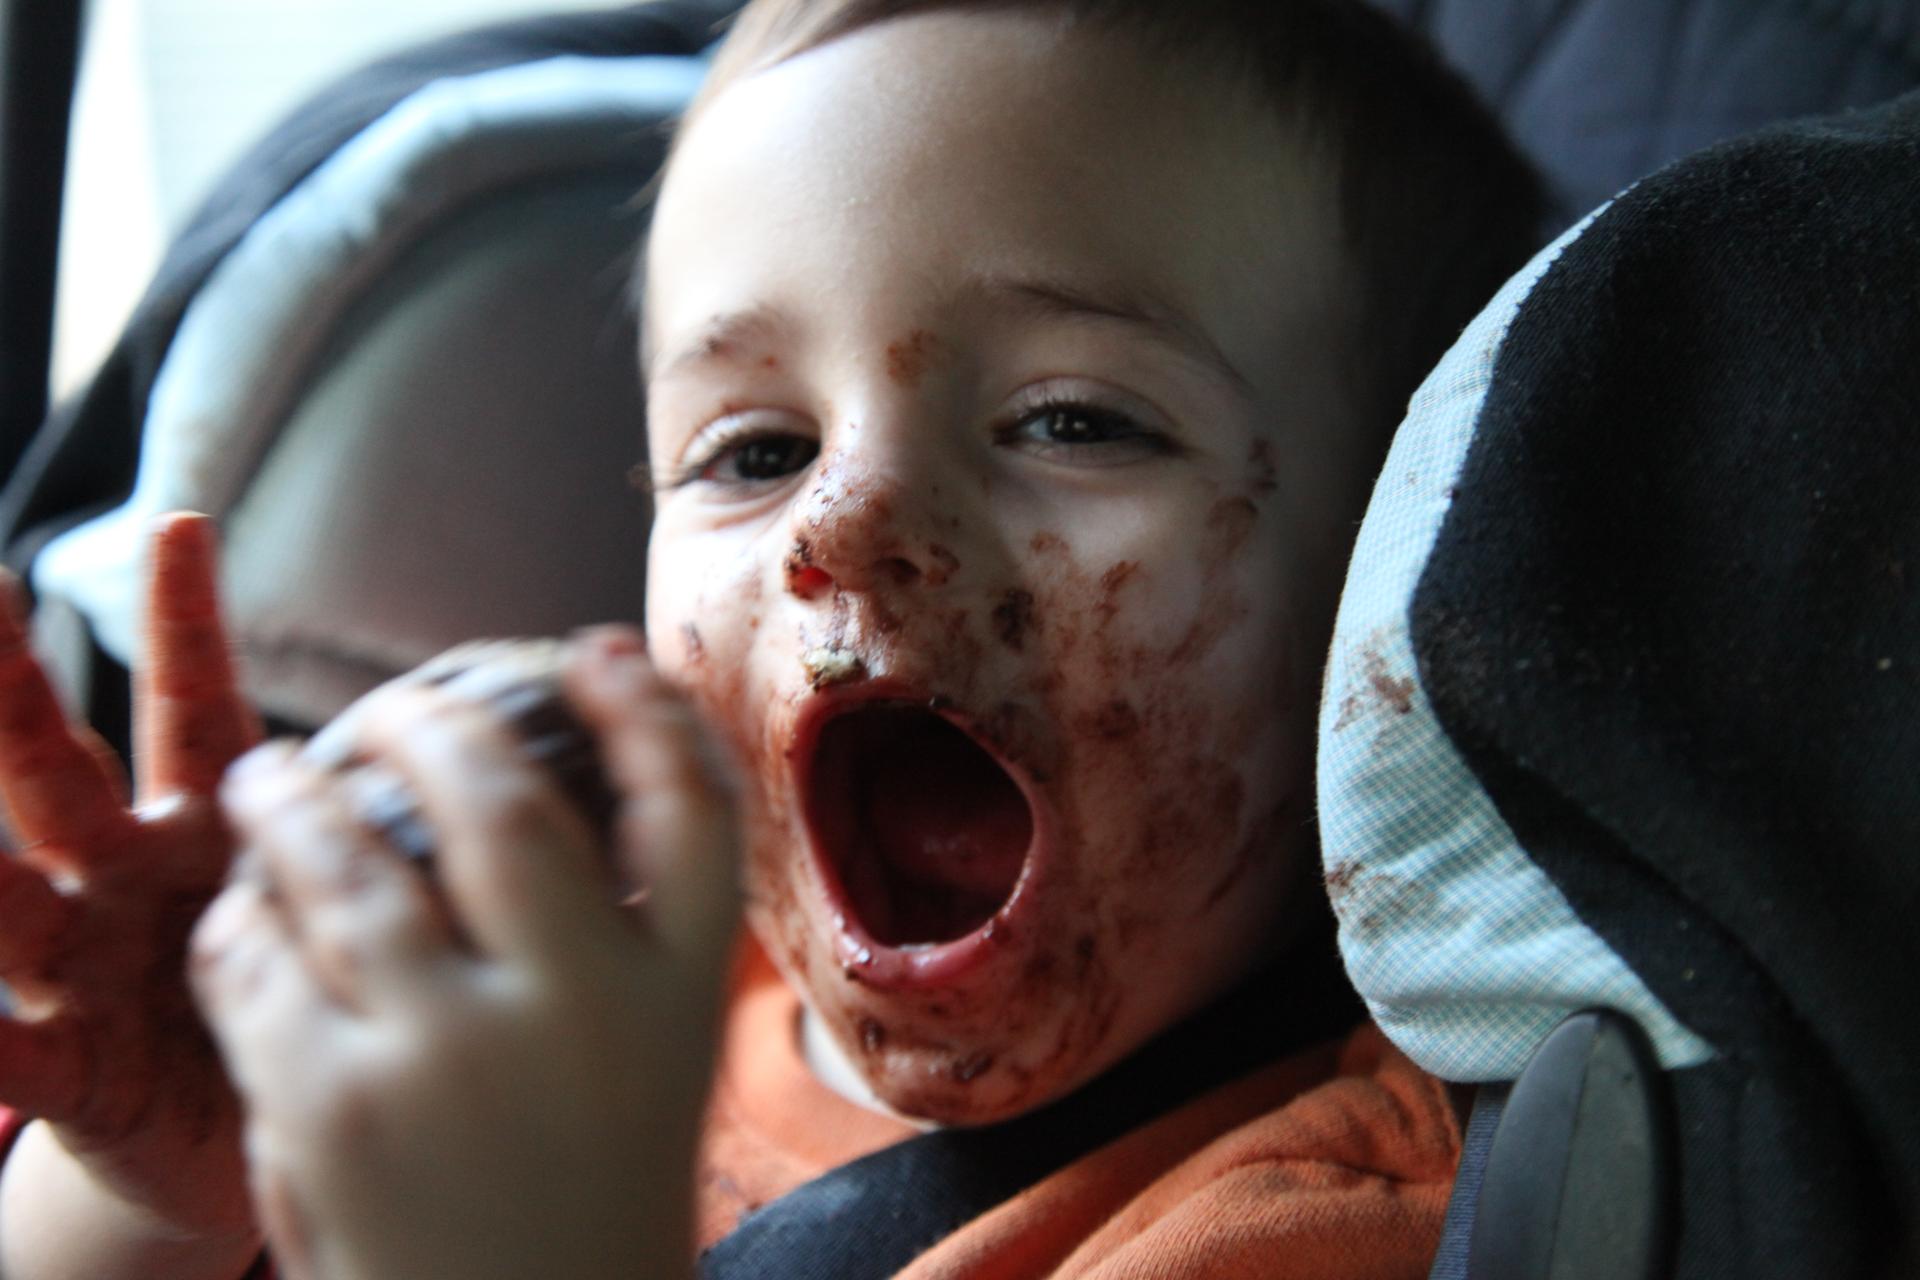 A young boy feasts on chocolate, but rising prices mean he might have to come up with less messy ways to enjoy it.